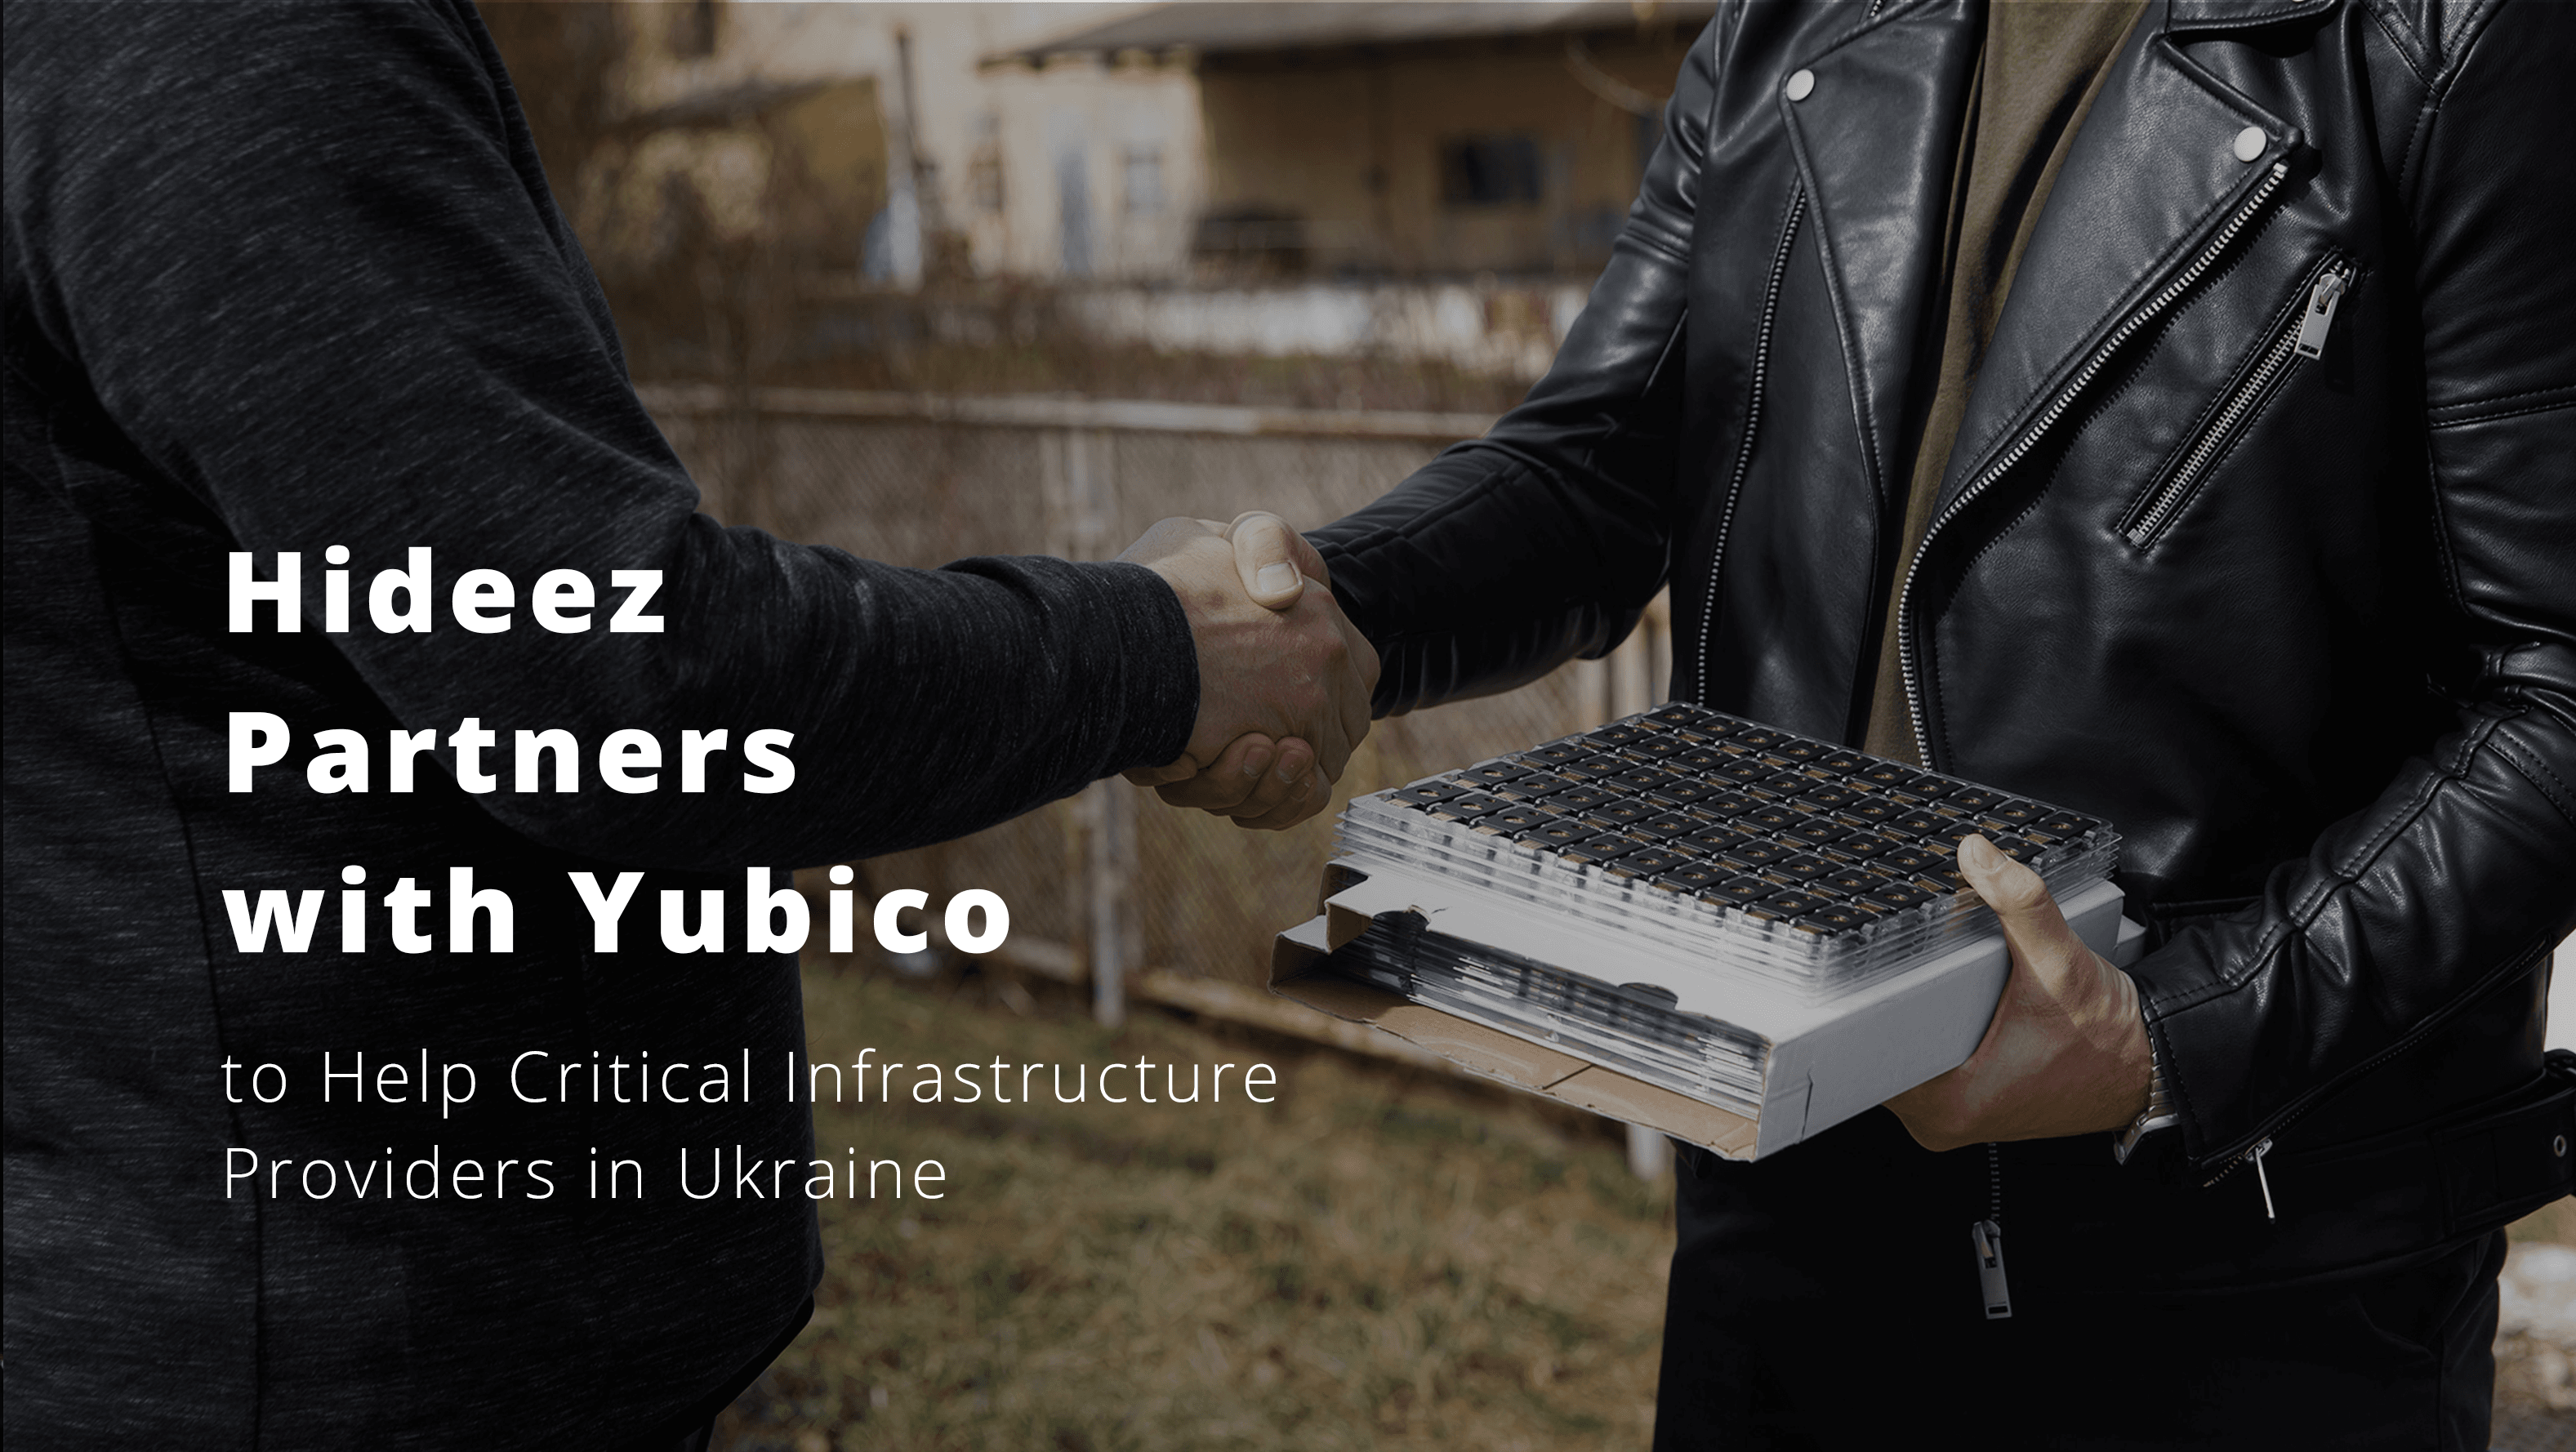 Hideez joins forces with Yubico to Help State-owned Companies Amid War